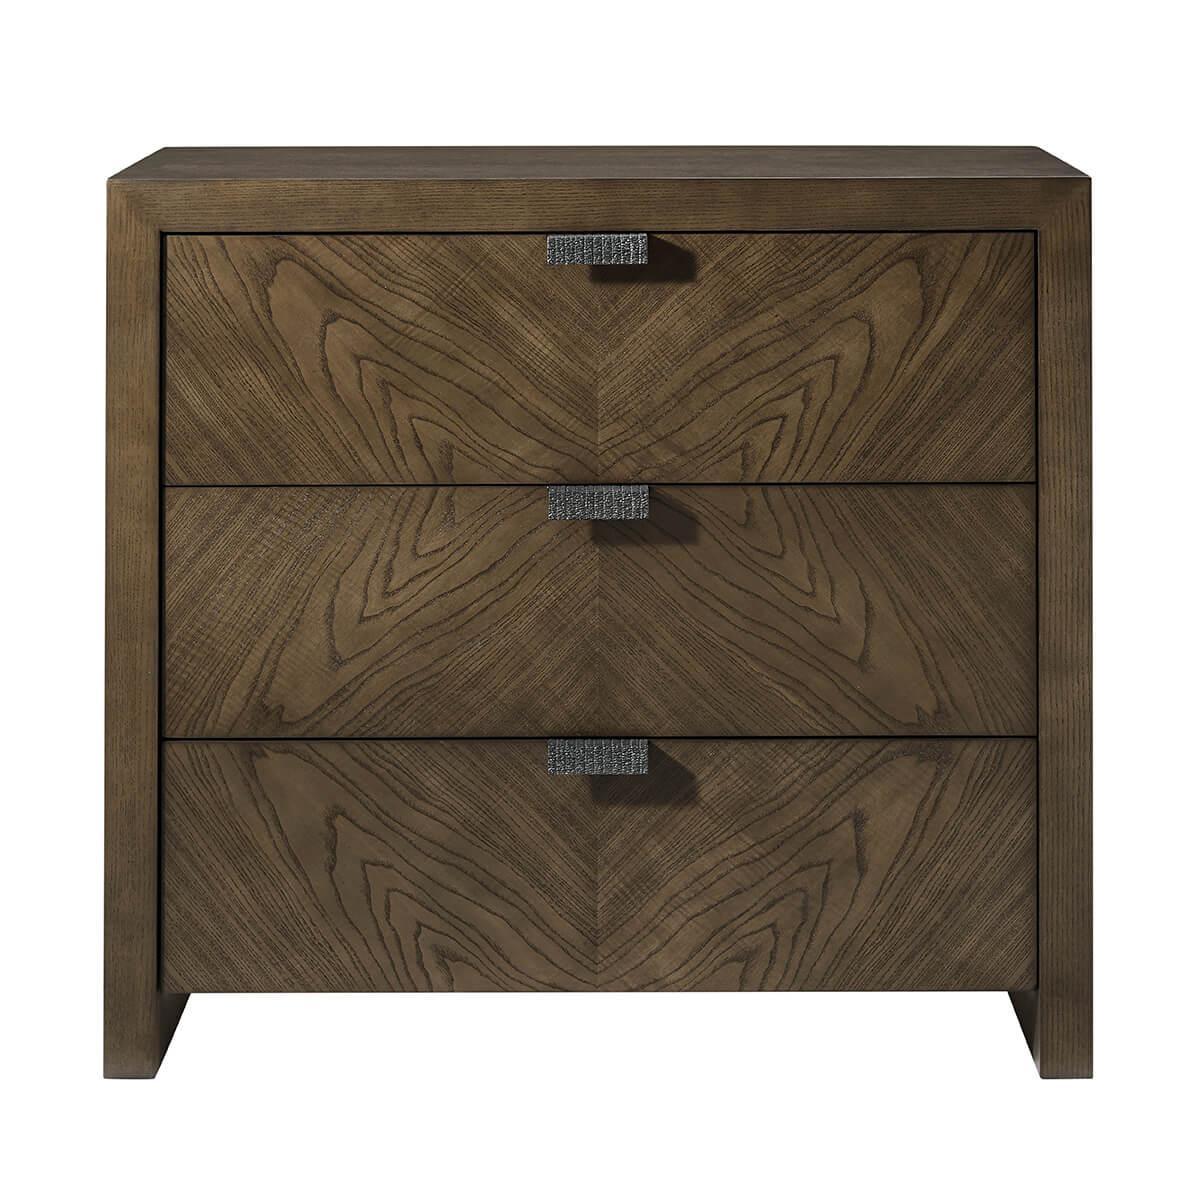 three drawer nightstand made of figured cathedral ash in artful grain patterns of our dark earth finish with textured metal pulls in our Ember finish and soft close drawers.

Dimensions: 32